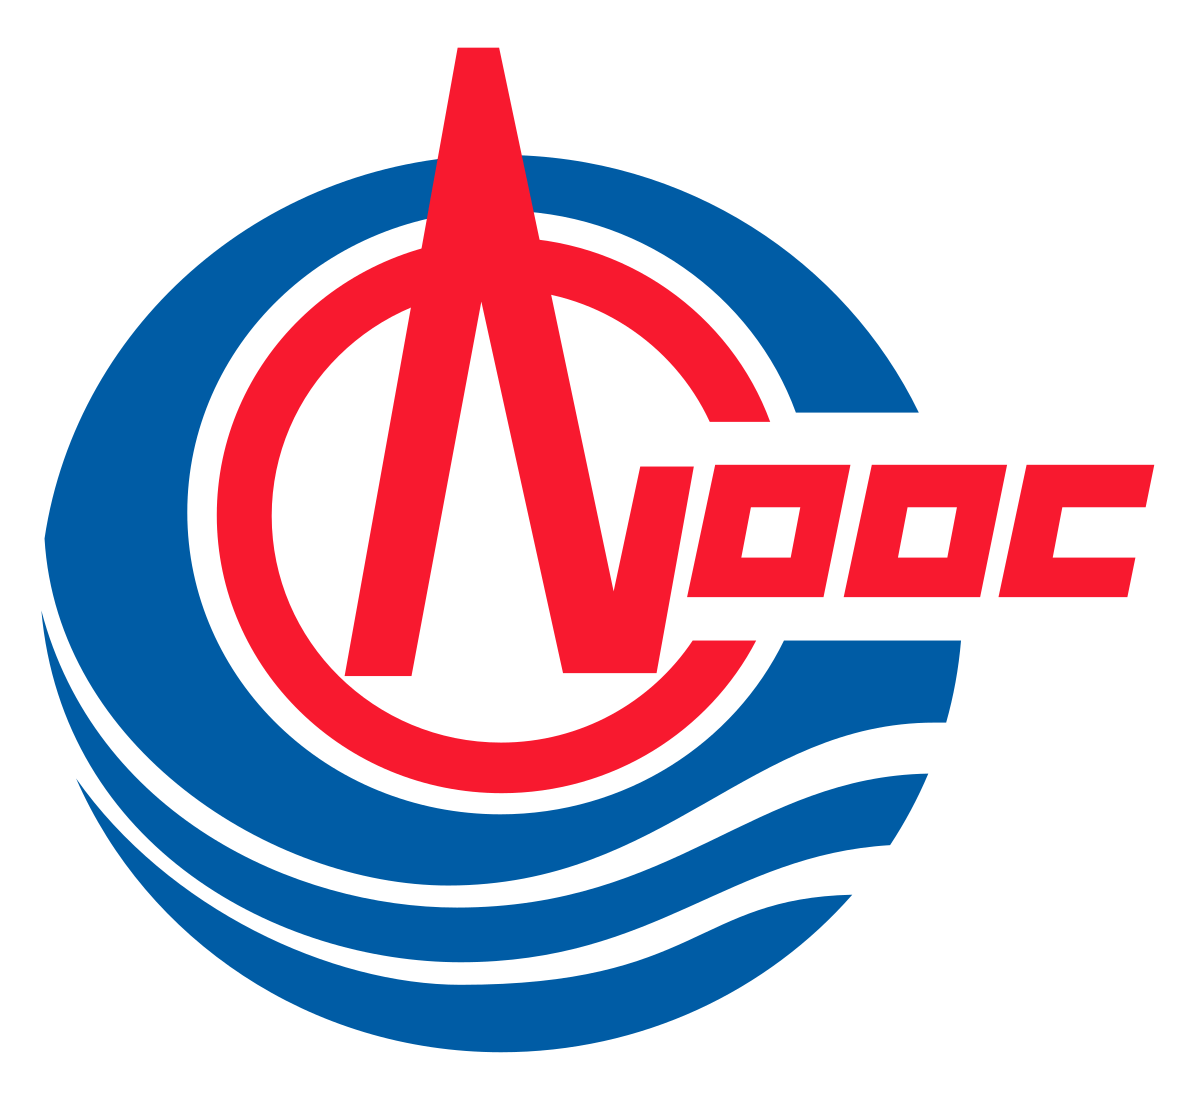 CNPC Logo - China National Offshore Oil Corporation